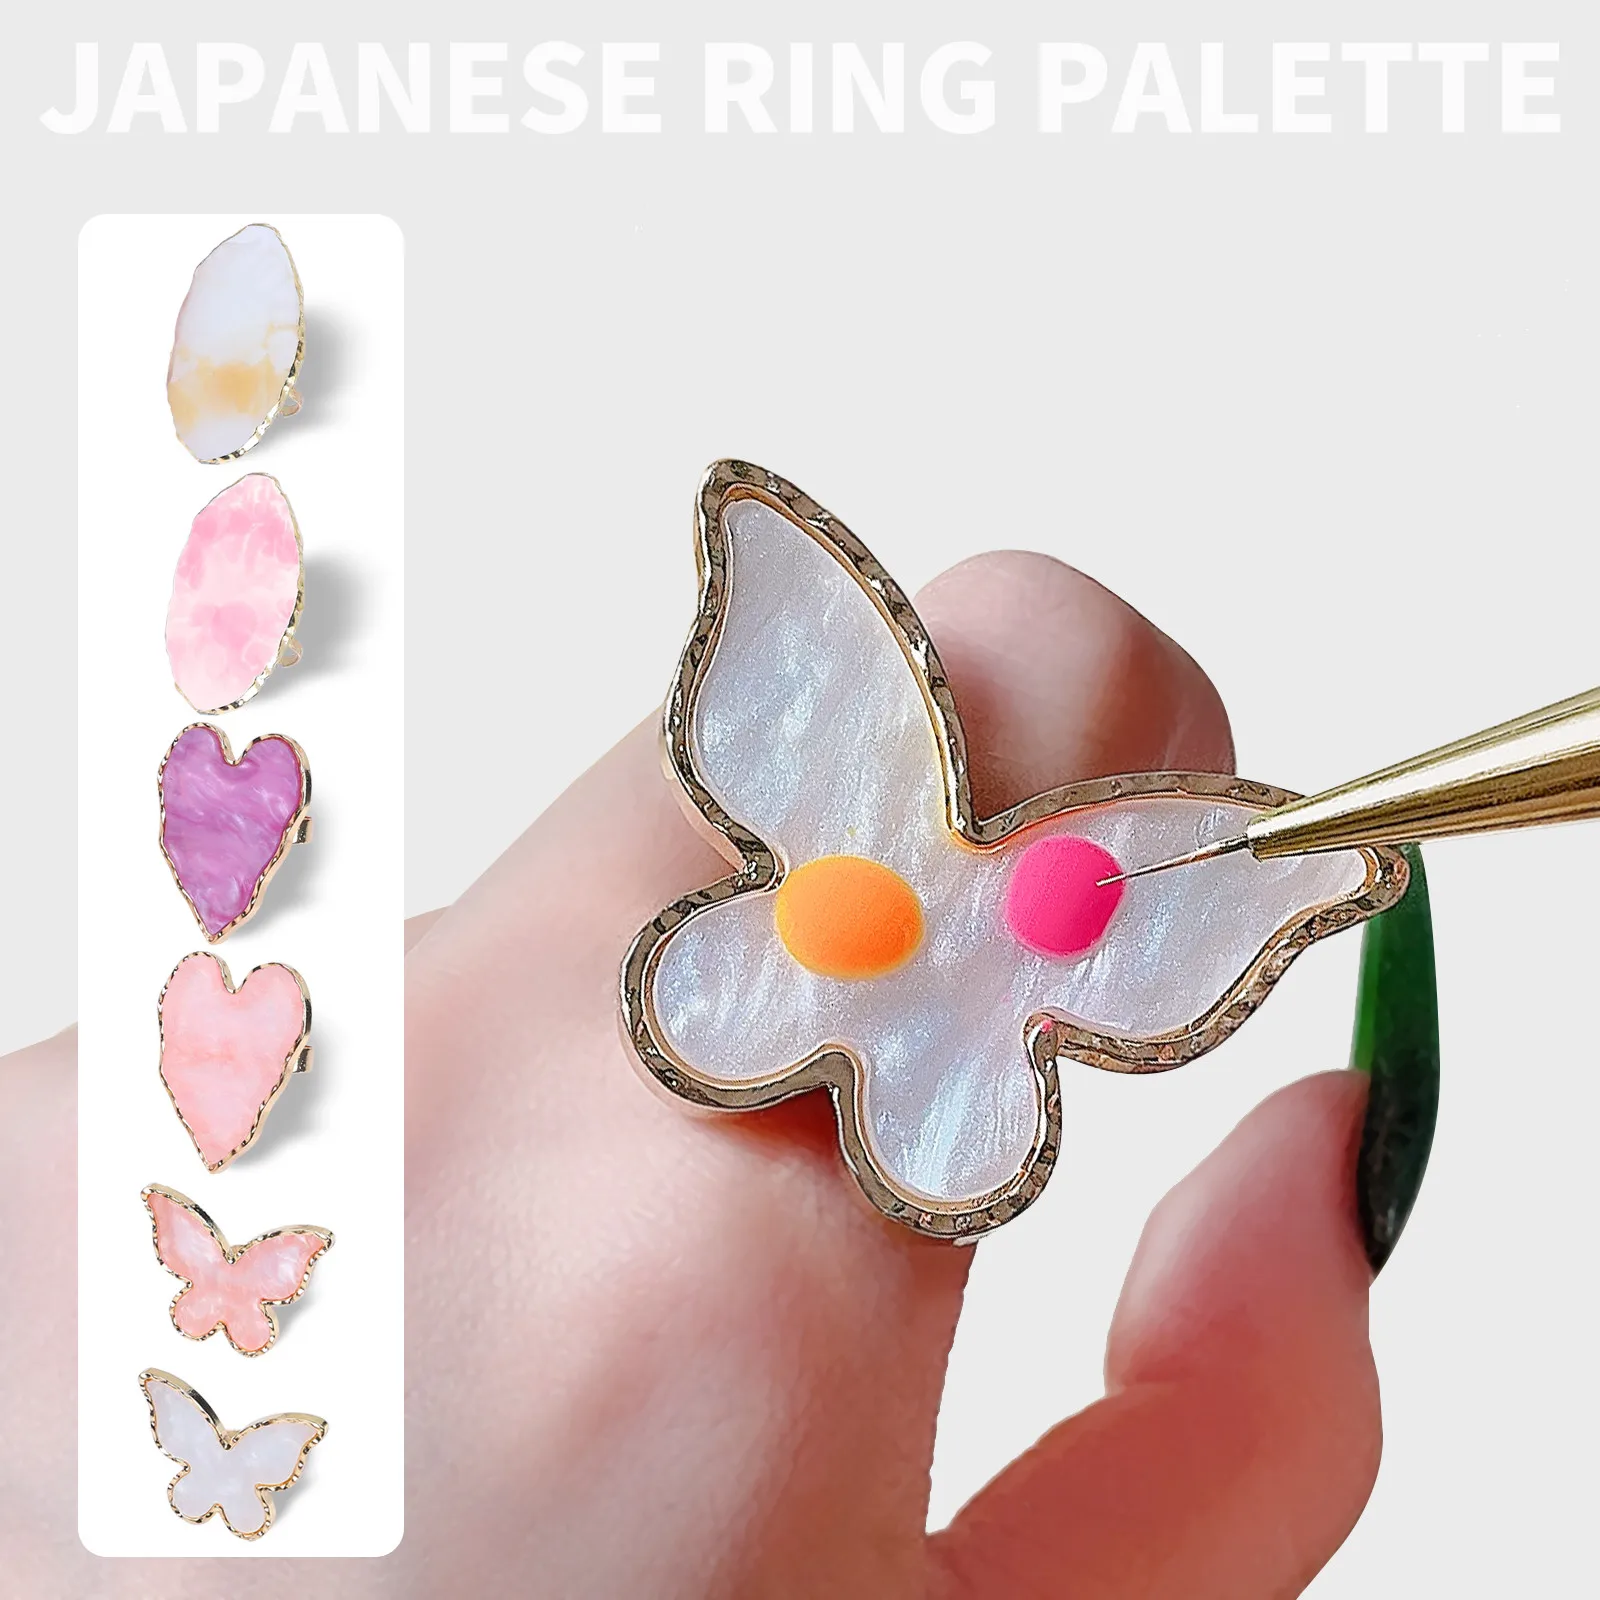 Misscheering 1 Pc Resion Ring Nail Color Palette for Mixing Fashion Heart Nails Accessories Tools for Manicure